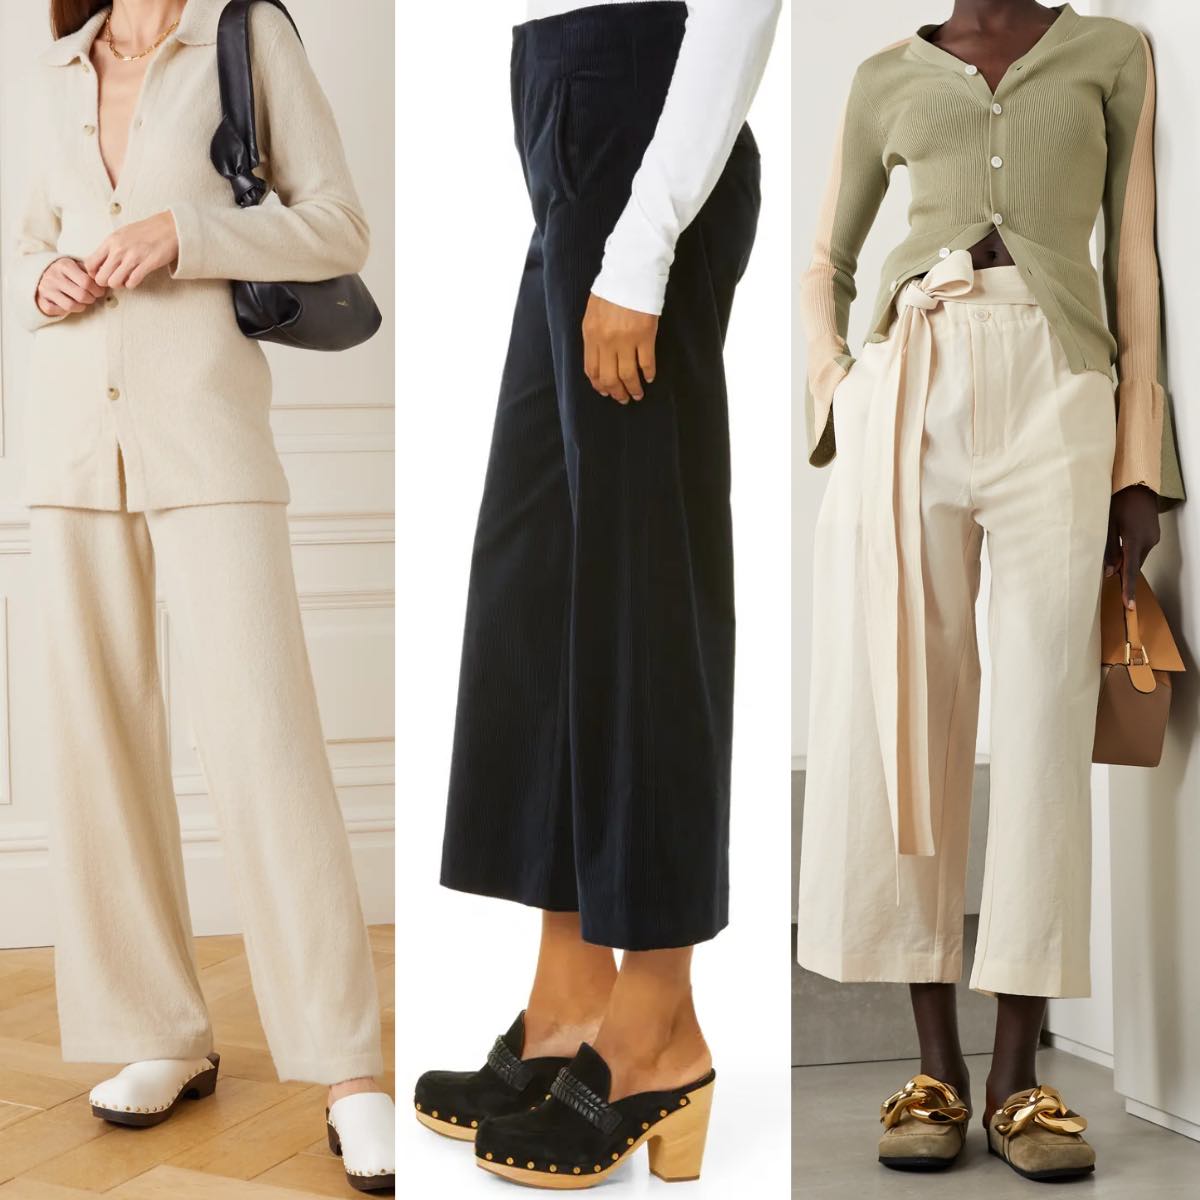 5 Chic Shoes to Wear with WideLeg Pants  PureWow